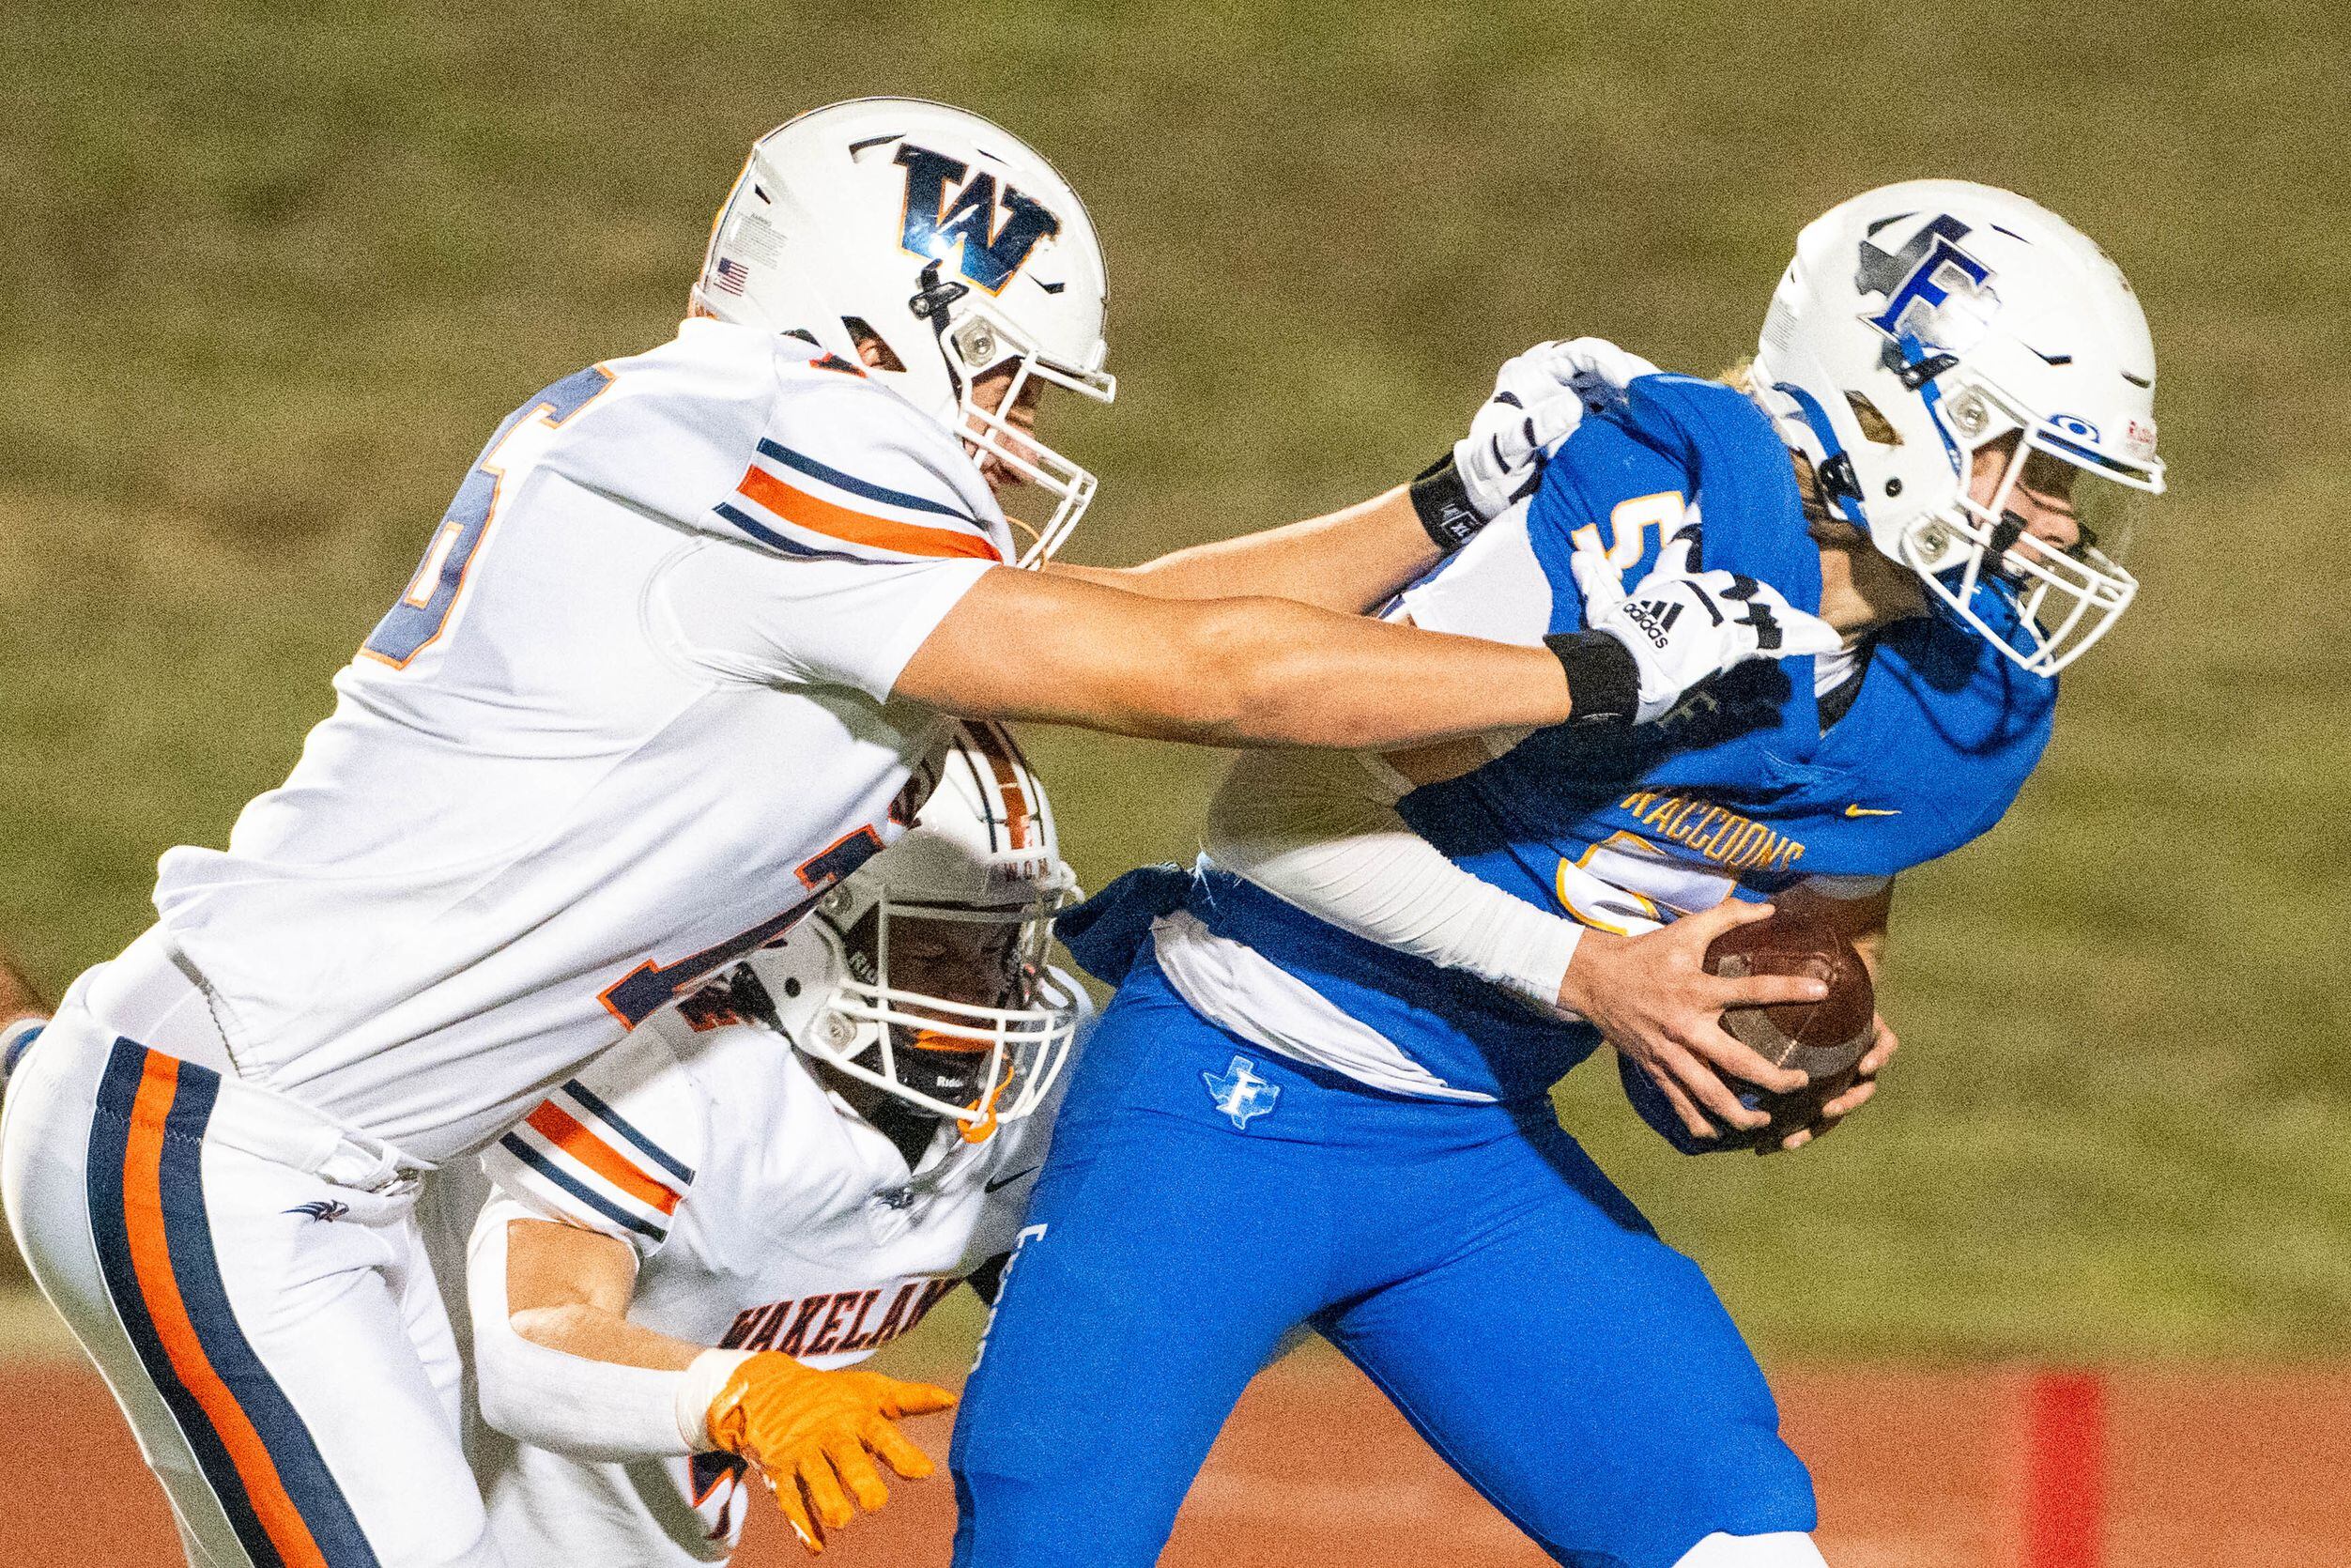 Frisco's Cobyn Harbert (5) escapes the sack attempt by Wakeland's Tristan Simmons (6) and...